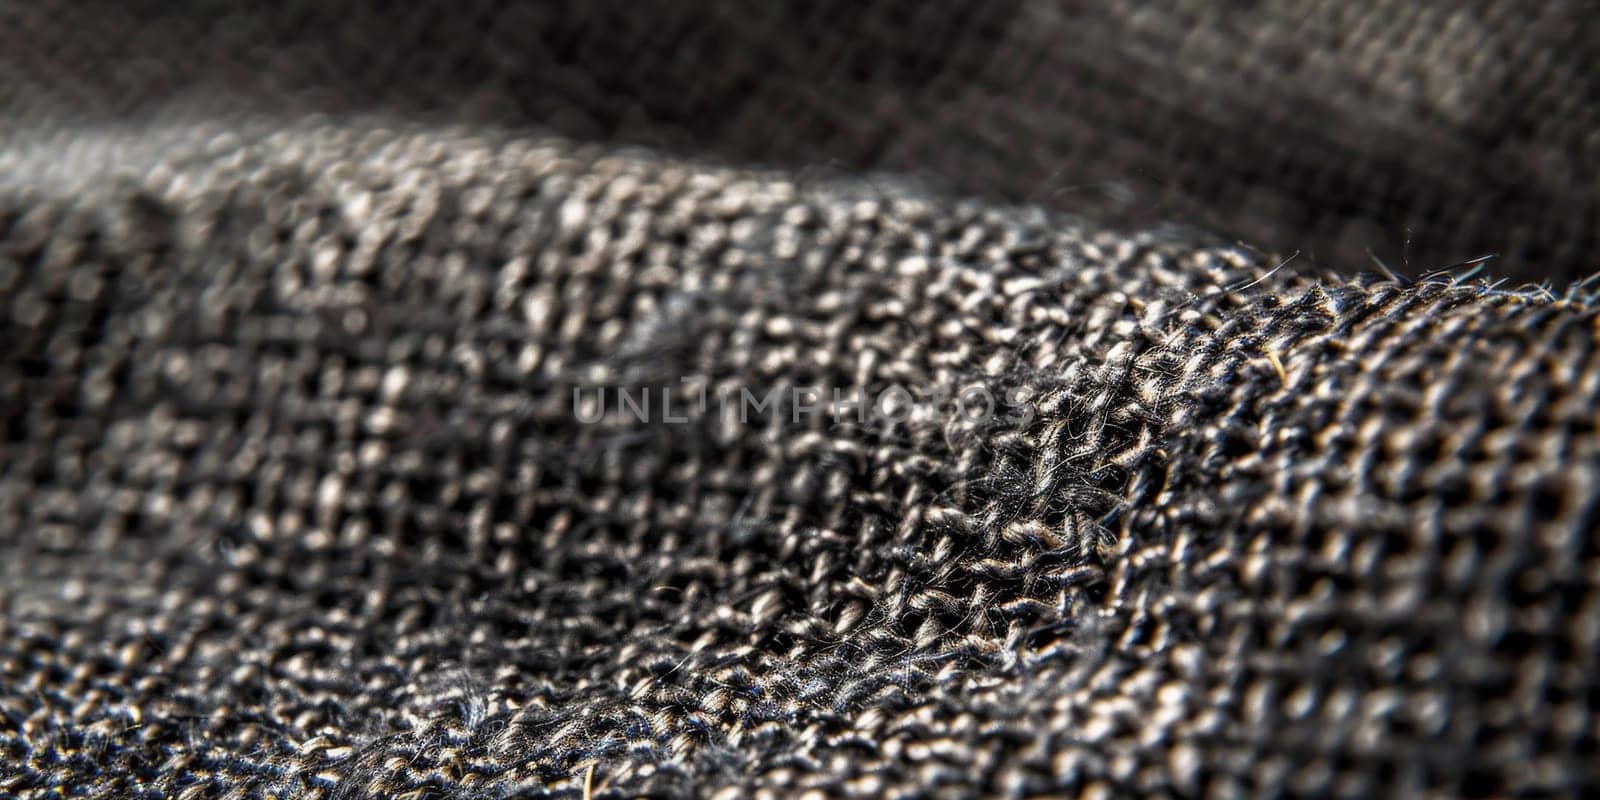 Close-ups of fabric textures, showcasing the weave, thread count, and surface details by Kadula